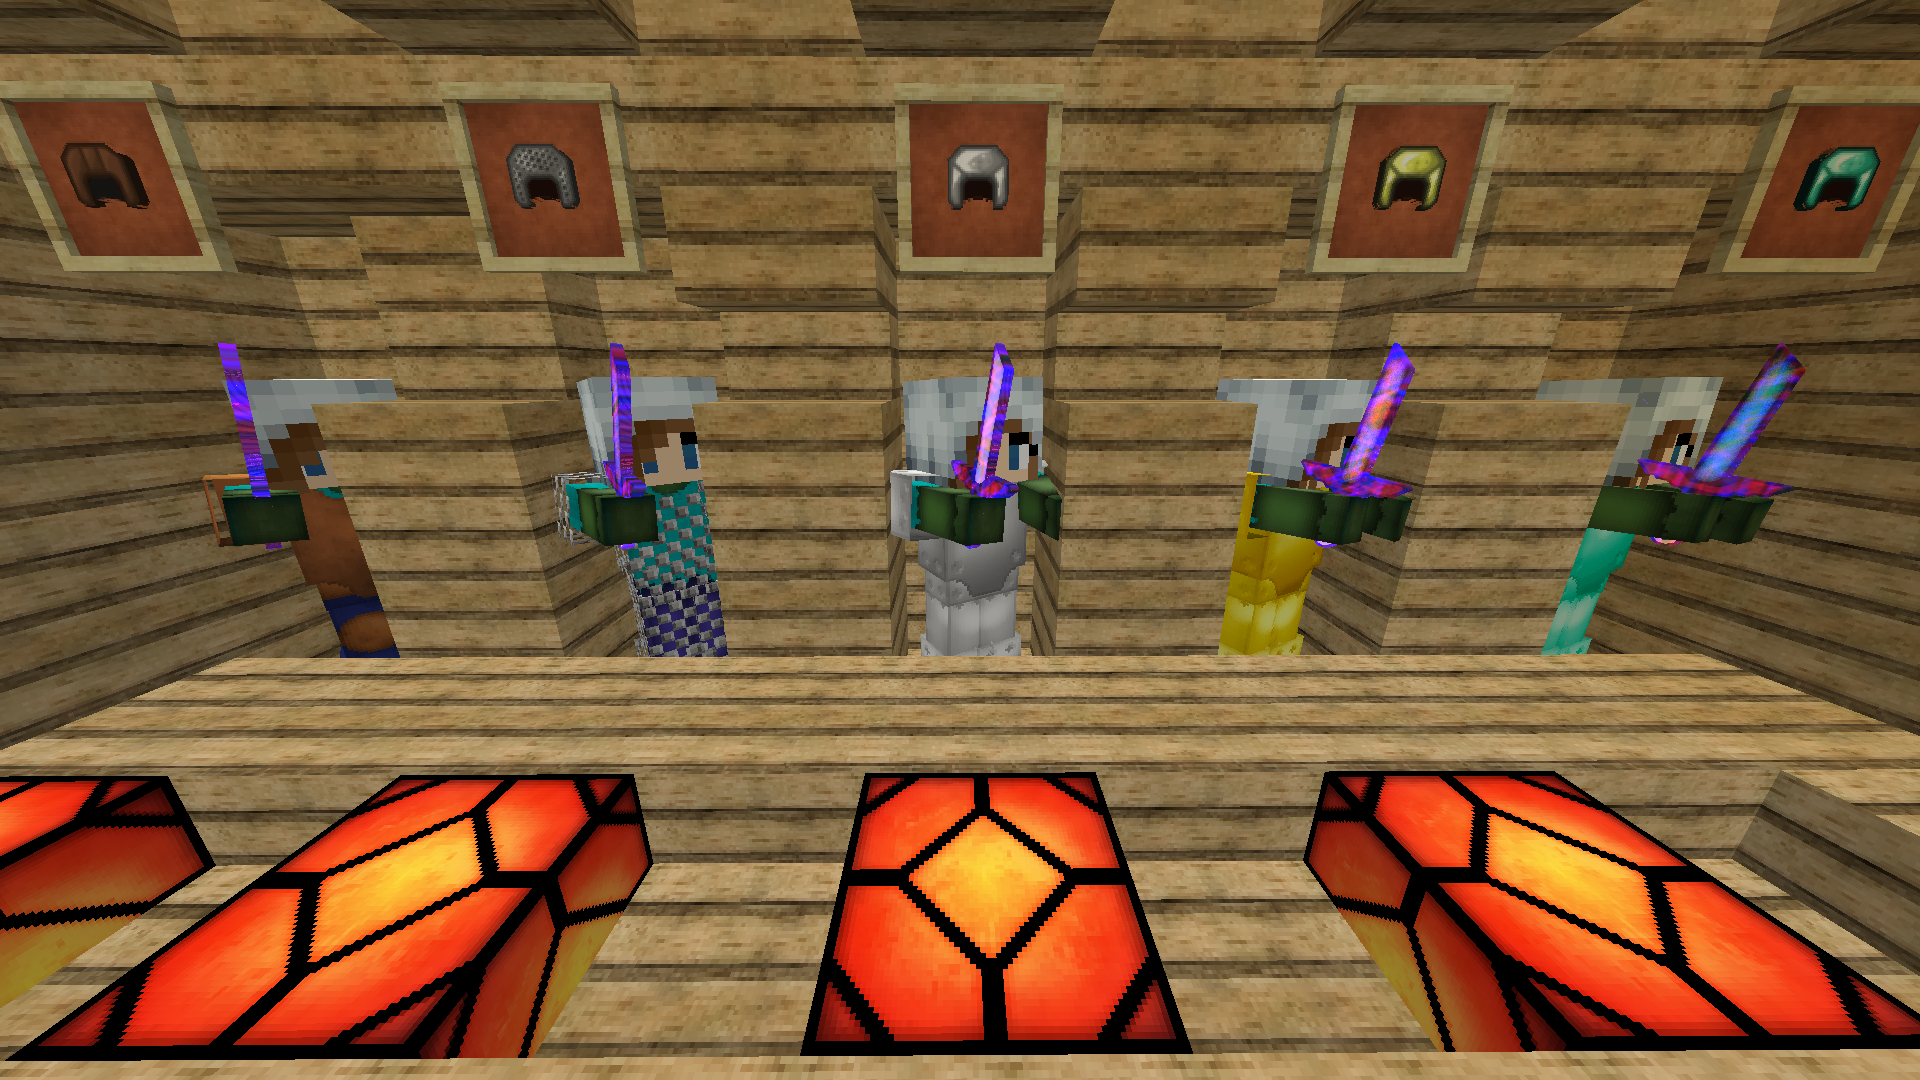 enchantment textures resource pack 1 14 resource pack.